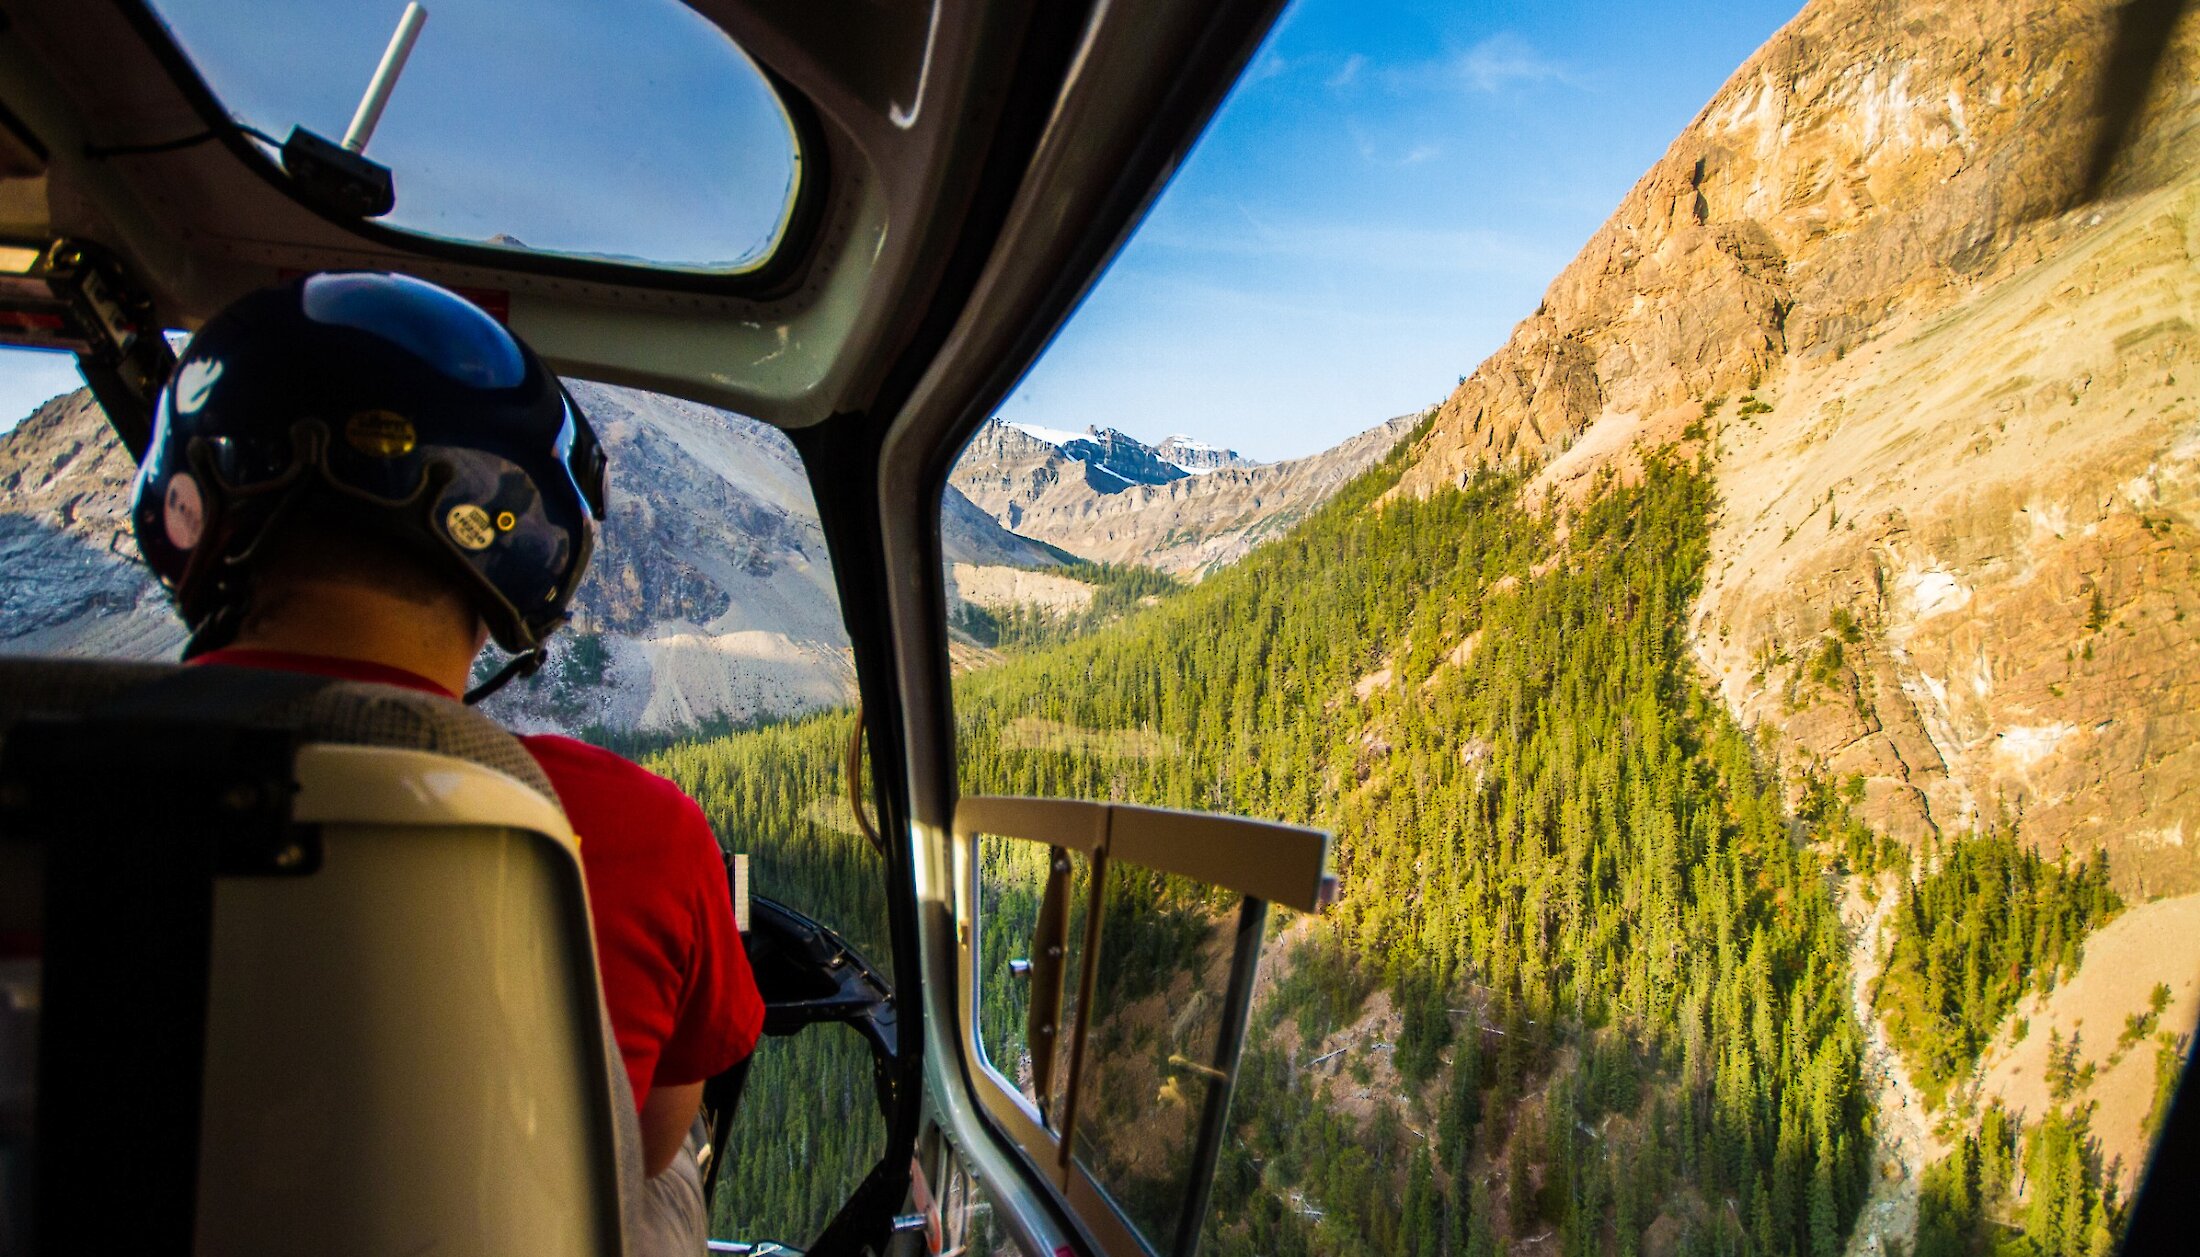 Get a bird's eye view of the Rocky Mountains from a helicopter